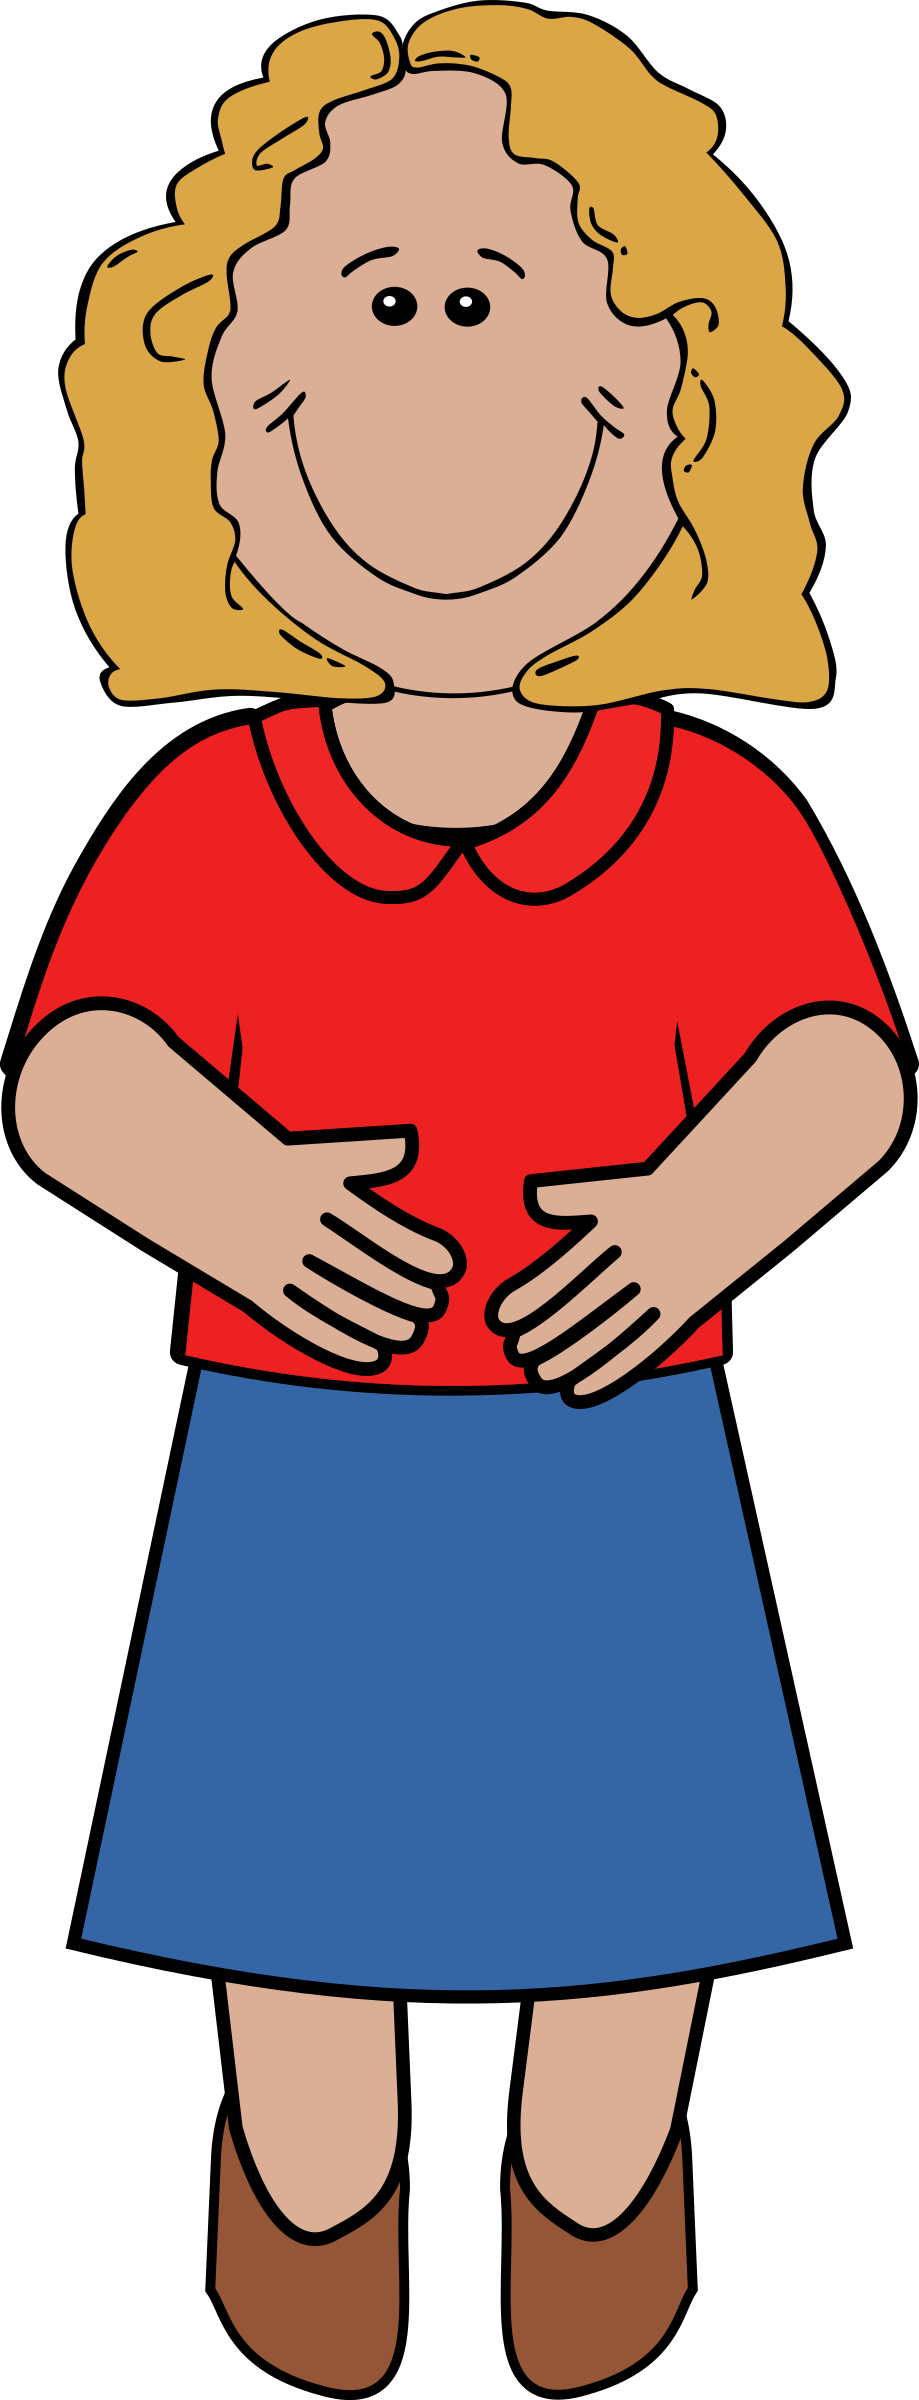 Mother clipart patient. Gut mommy 